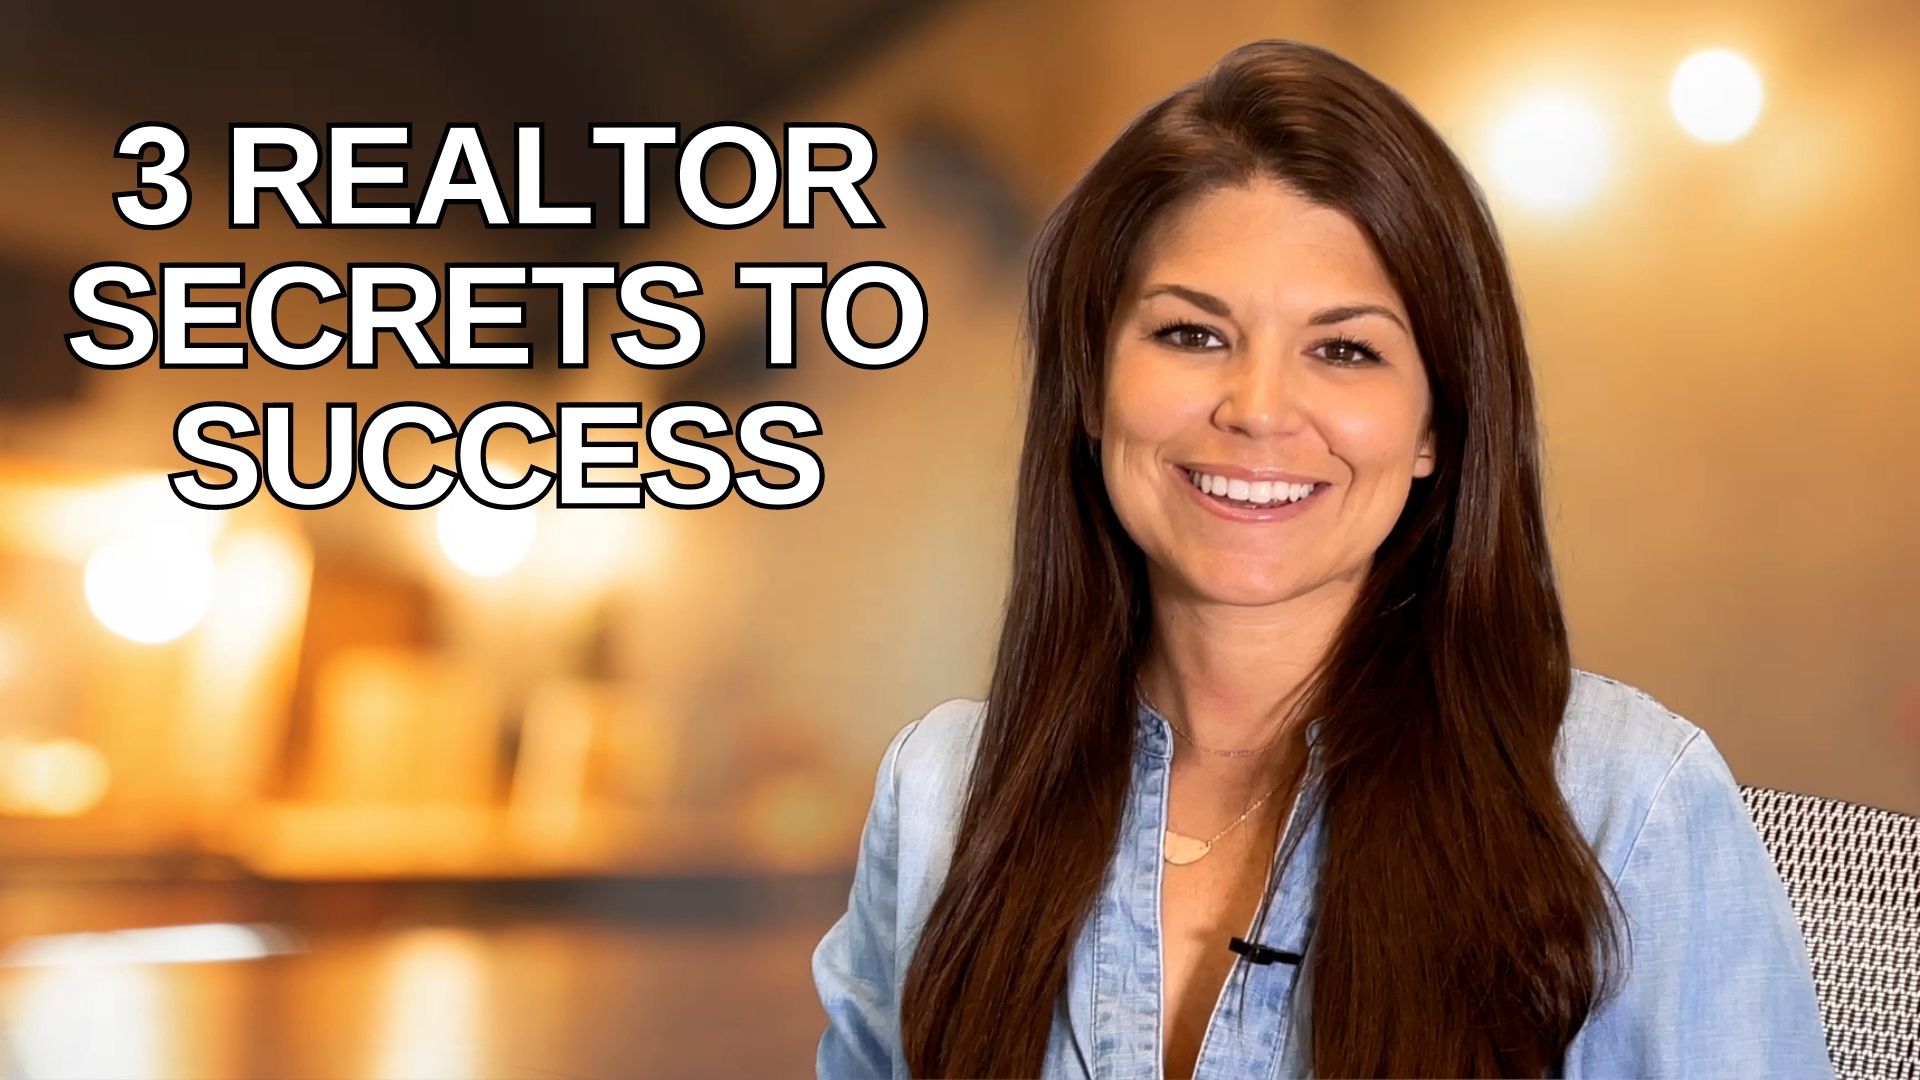 3 Keys to Success: How Real Estate Agents Can Make It in a Tough Industry